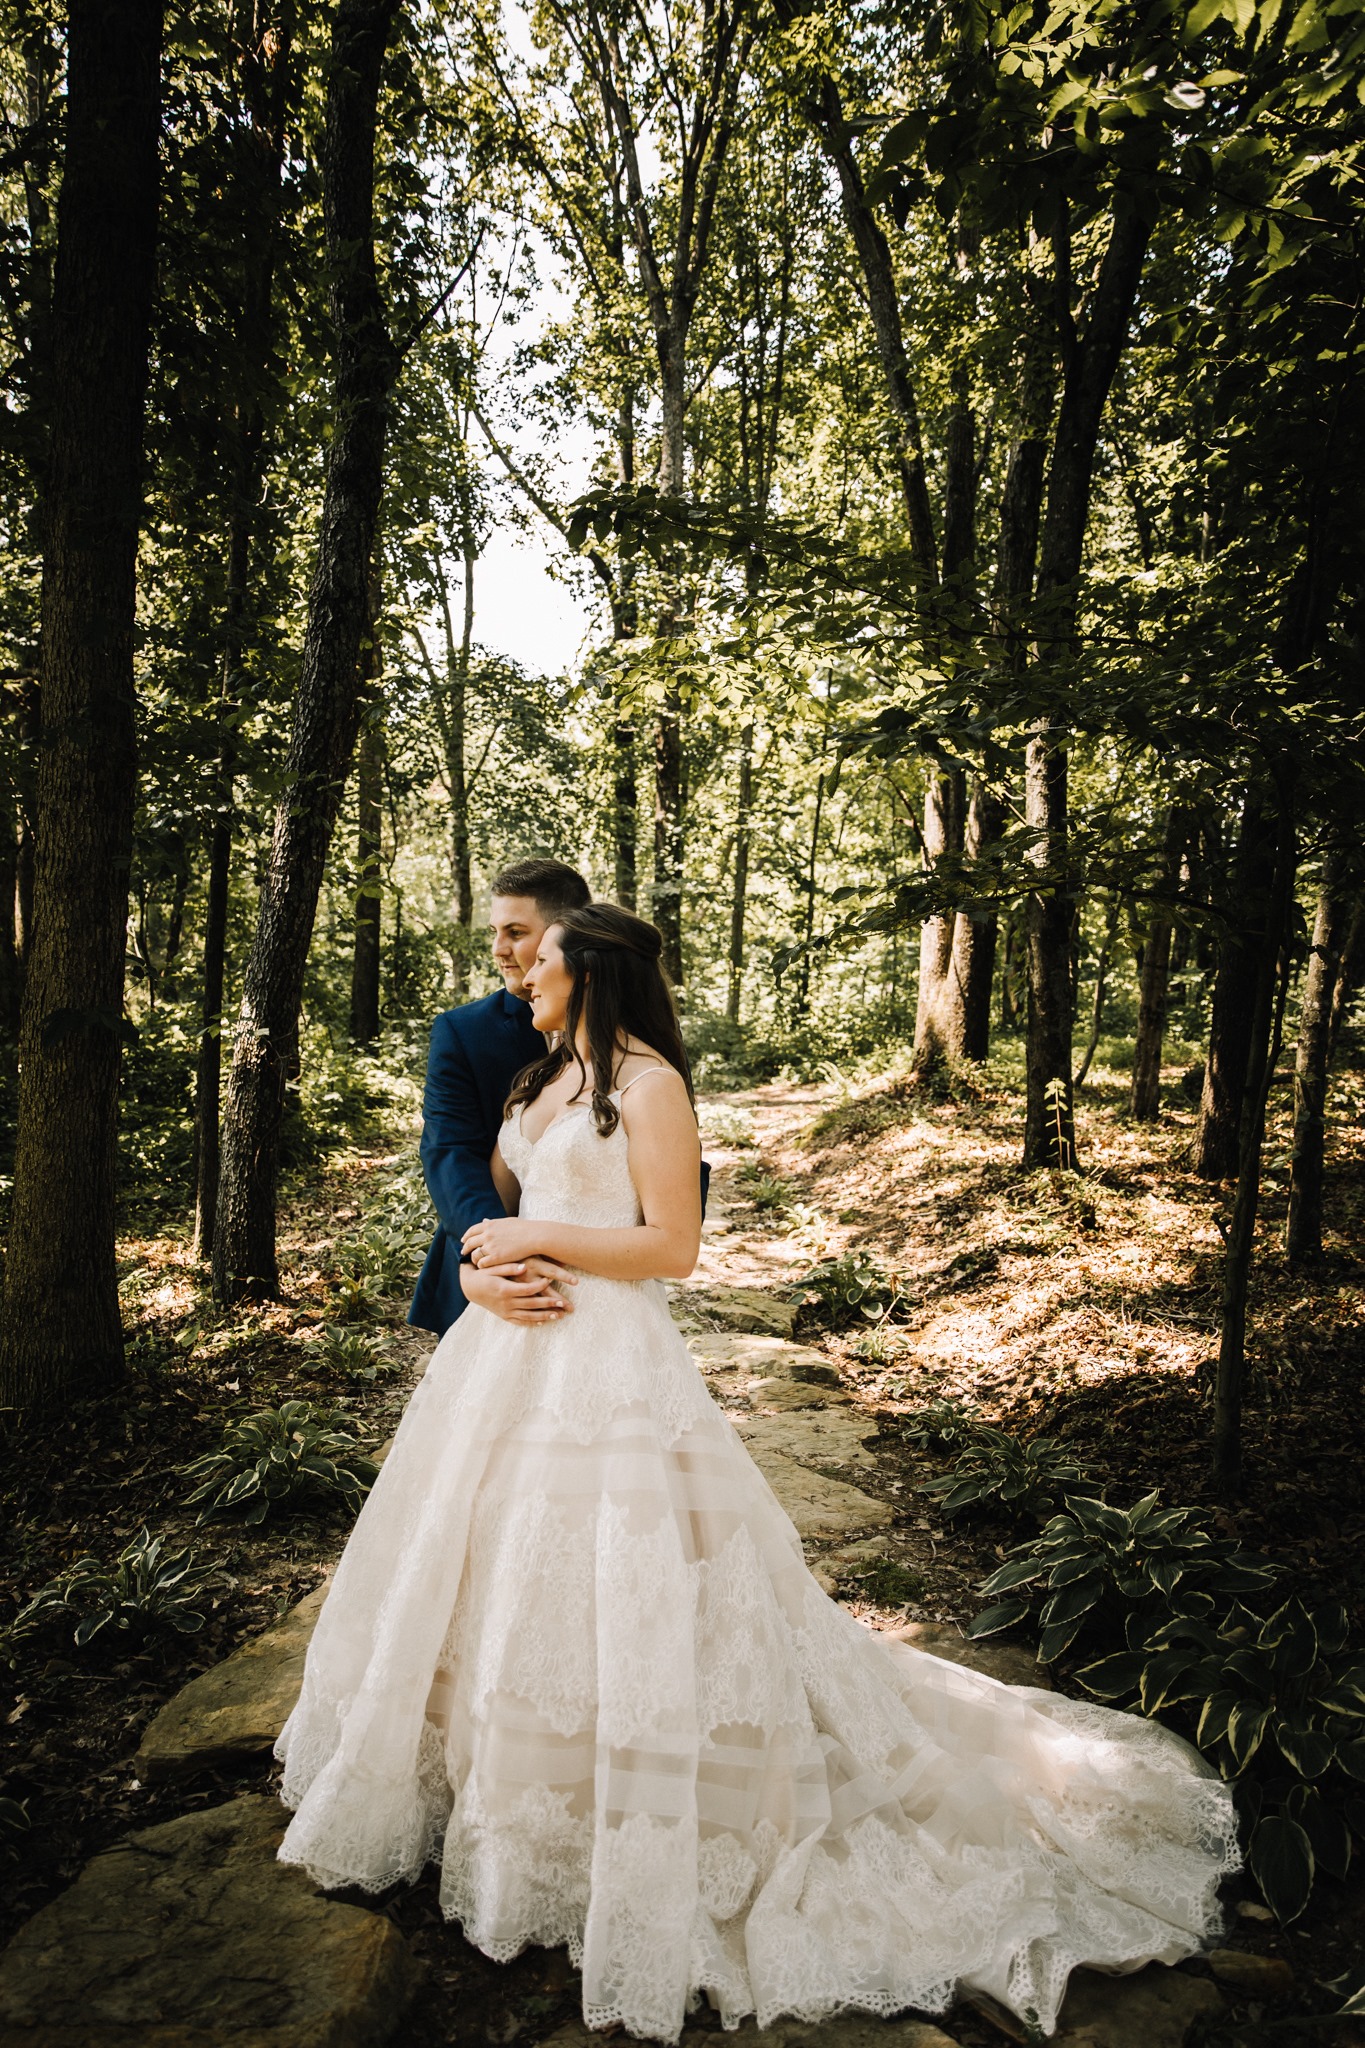 How to know if your photographer is the right fit, featured on Nashville Bride Guide